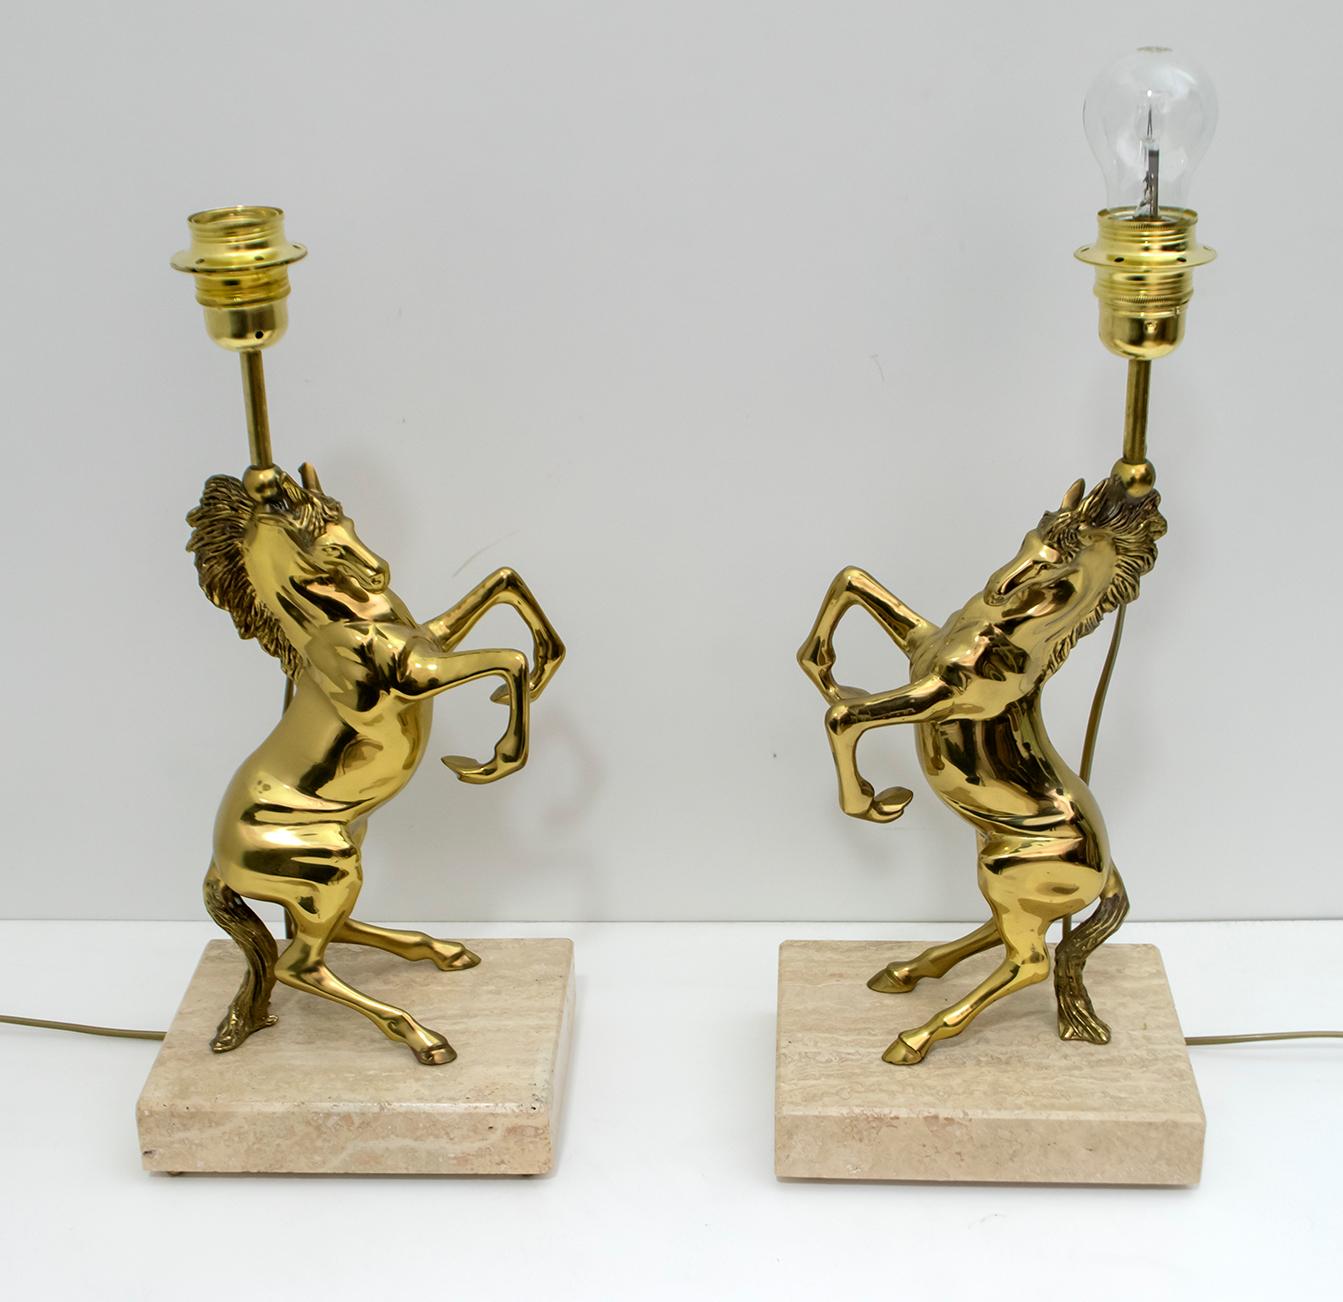 This pair of French lamps were produced in the 1970s and attributed to Maison Charles.
The lamps, two polished brass horses resting on a travertine base and brass feet.